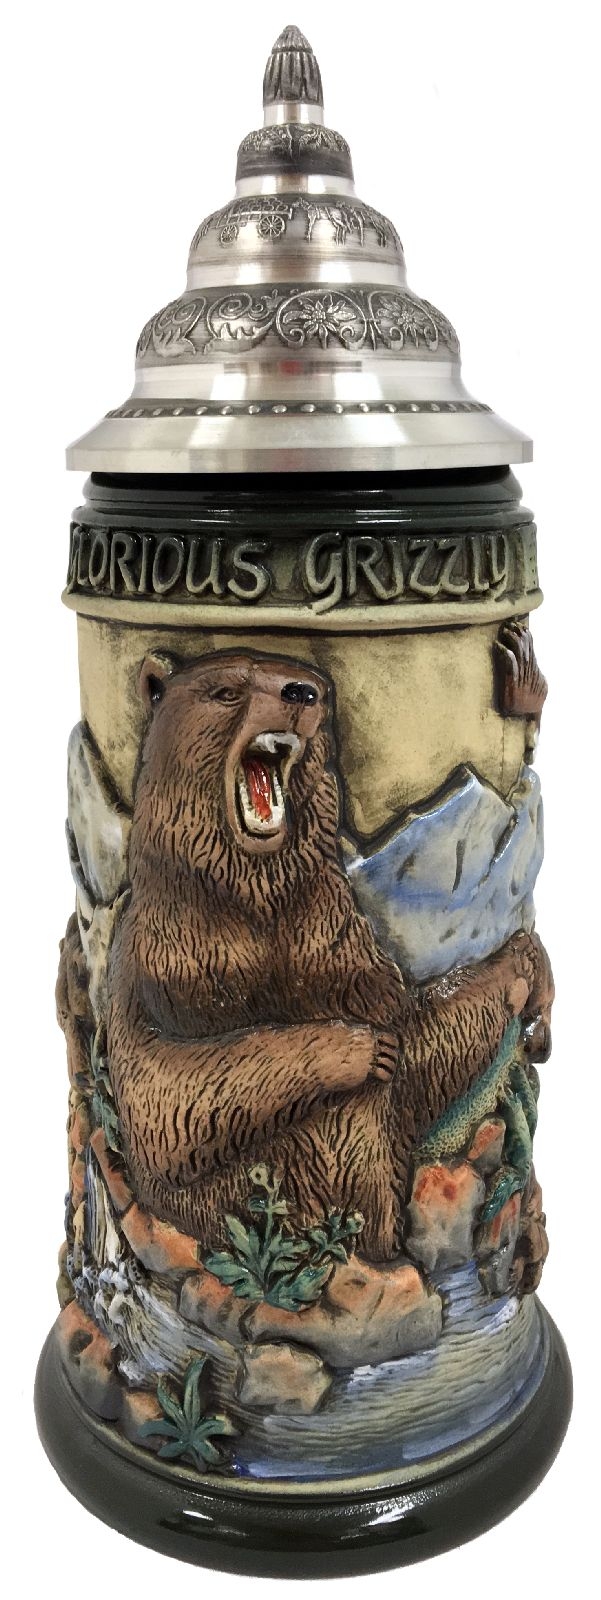 Grizzly Bear Fishing For Salmon Rustic Relief LE German Beer Stein .75 L Germany